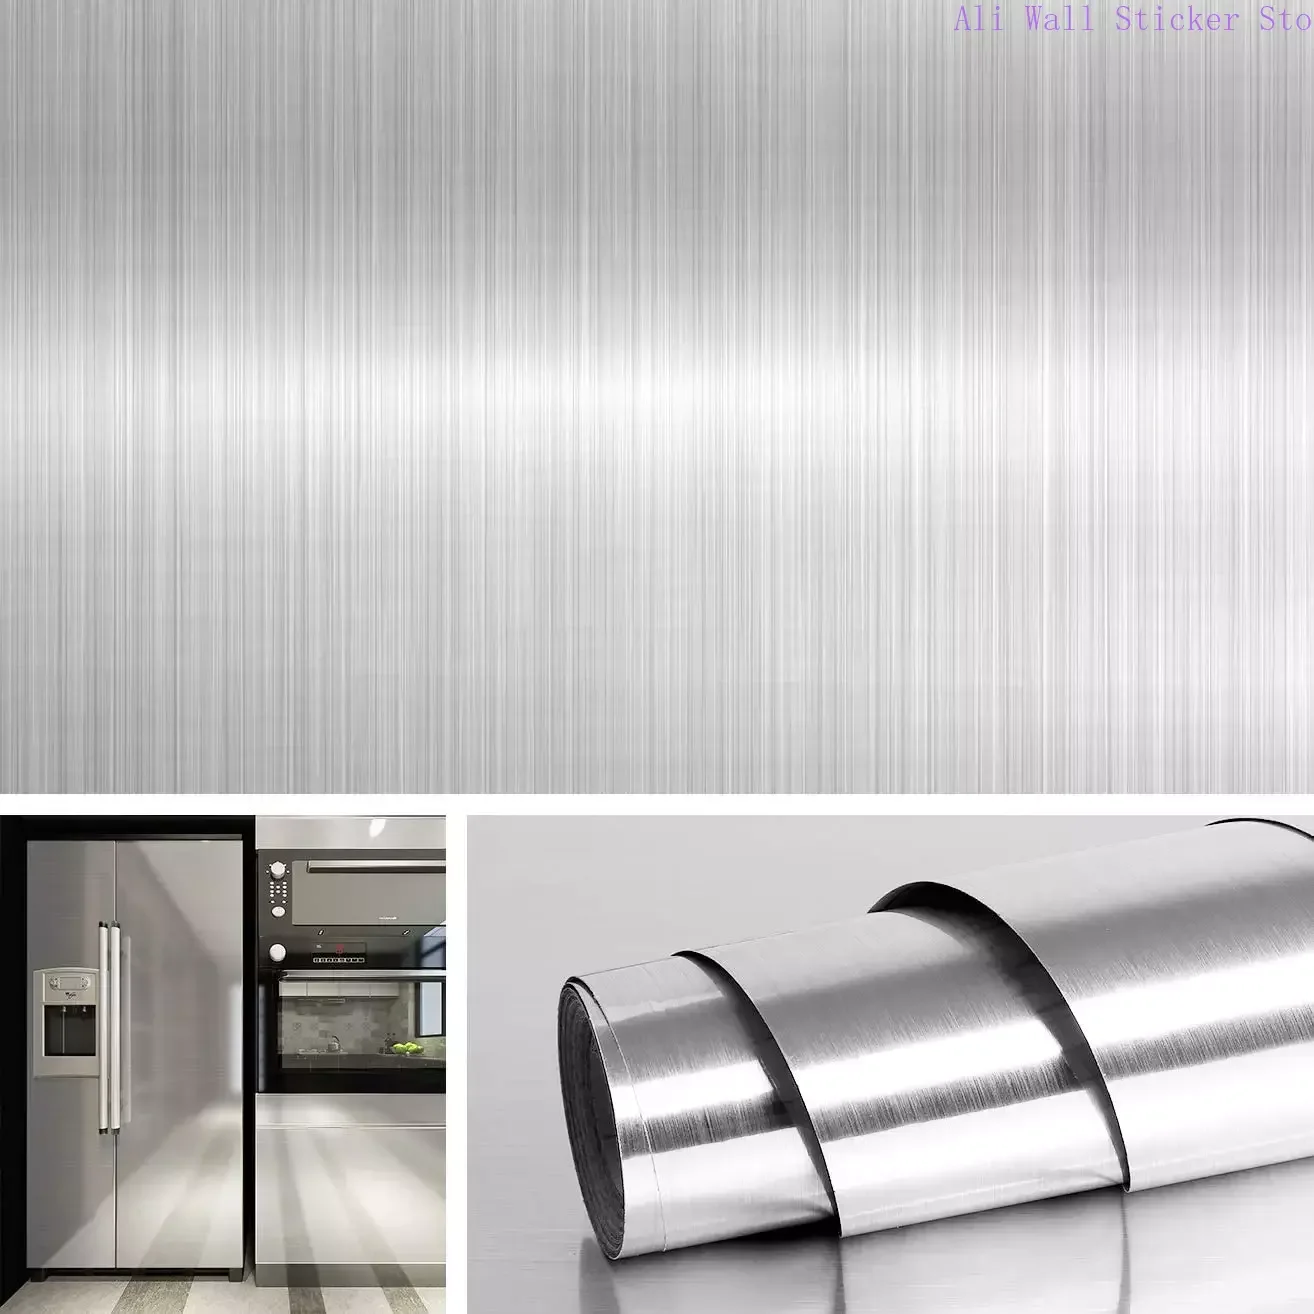 

40/60cm Wide Brushed Nickel Vinyl Wallpaper Decorative Stainless Steel Wall Papers Countertops Kitchen Car Stick Film Decor